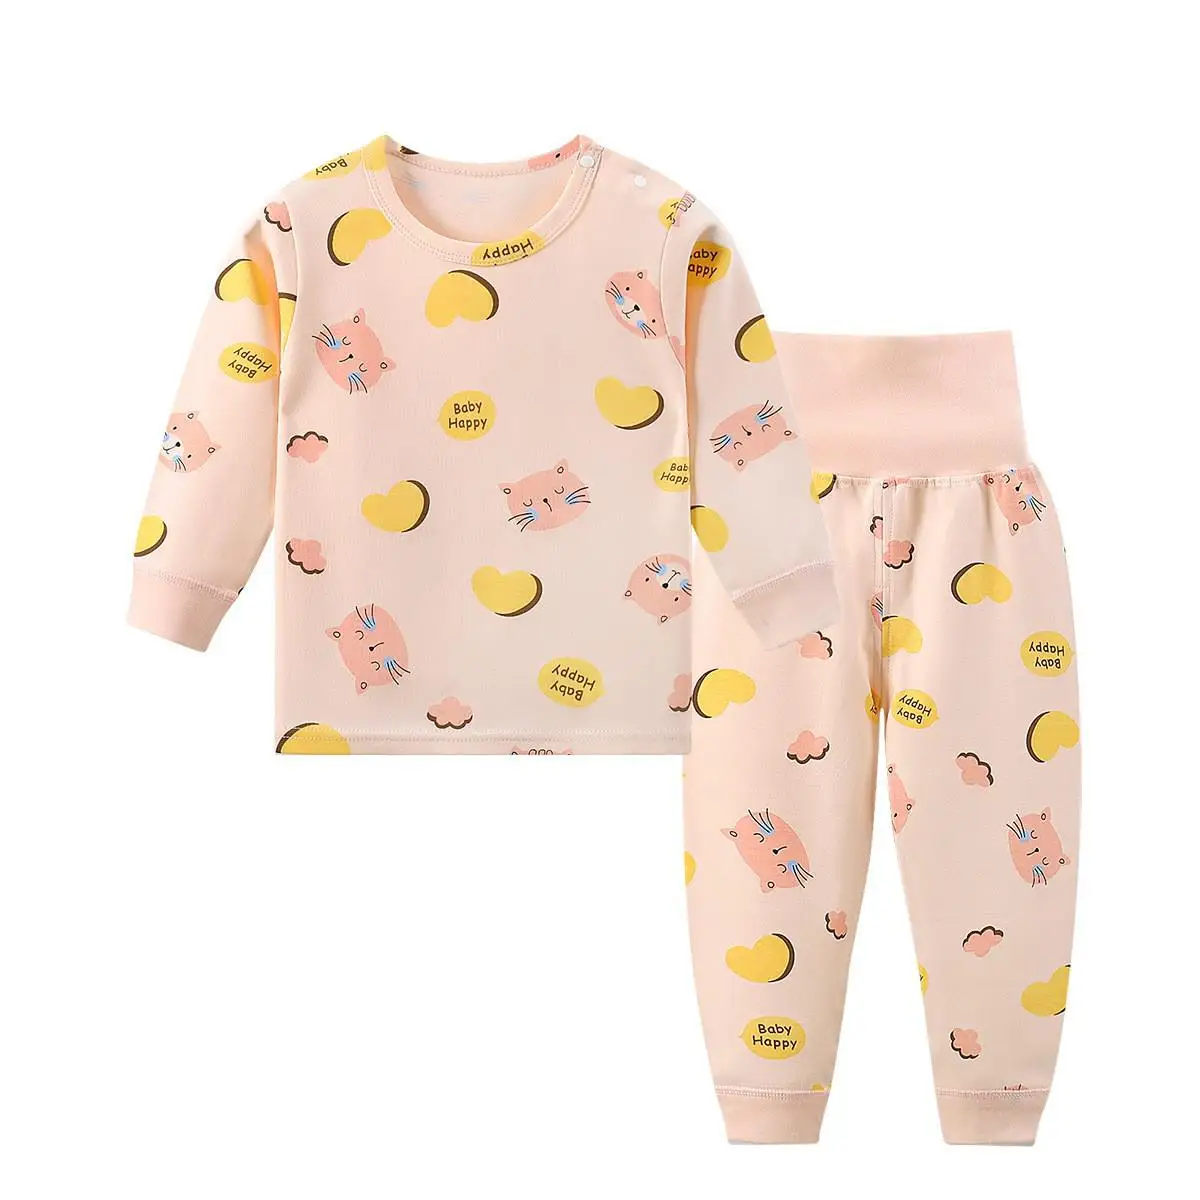 6 9 12 18 Month Baby Boutiique Suit Baby Girl Clothes Winter Casual 2 Piece Set Pure Cotton Children Pajamas Baby Girl Outfits vintage Baby Clothing Set Baby Clothing Set